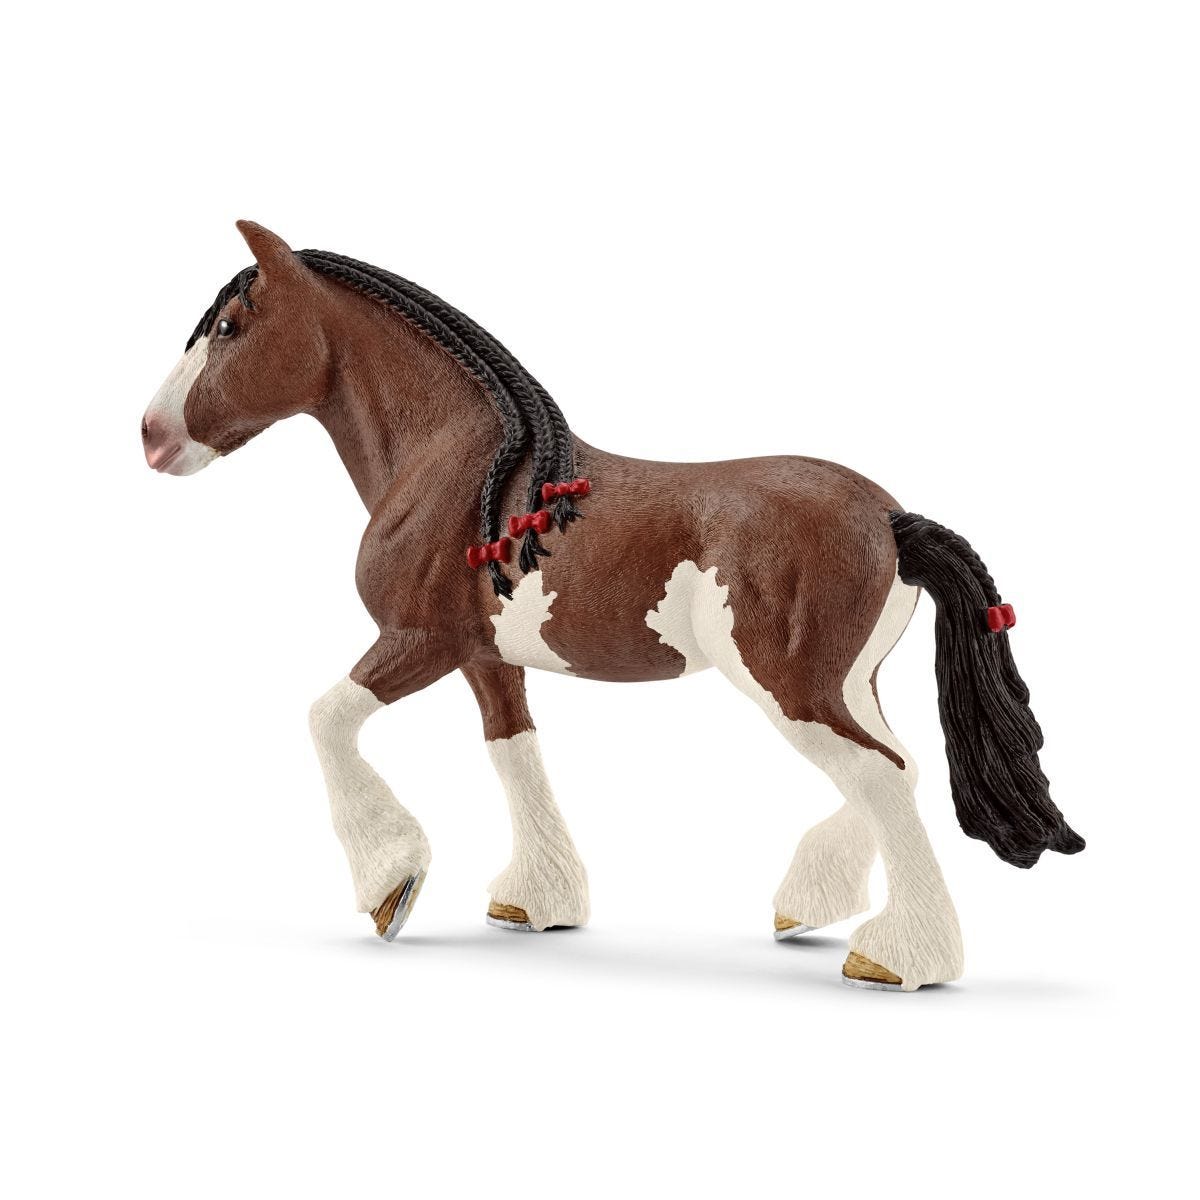 Clydesdale mare 13809